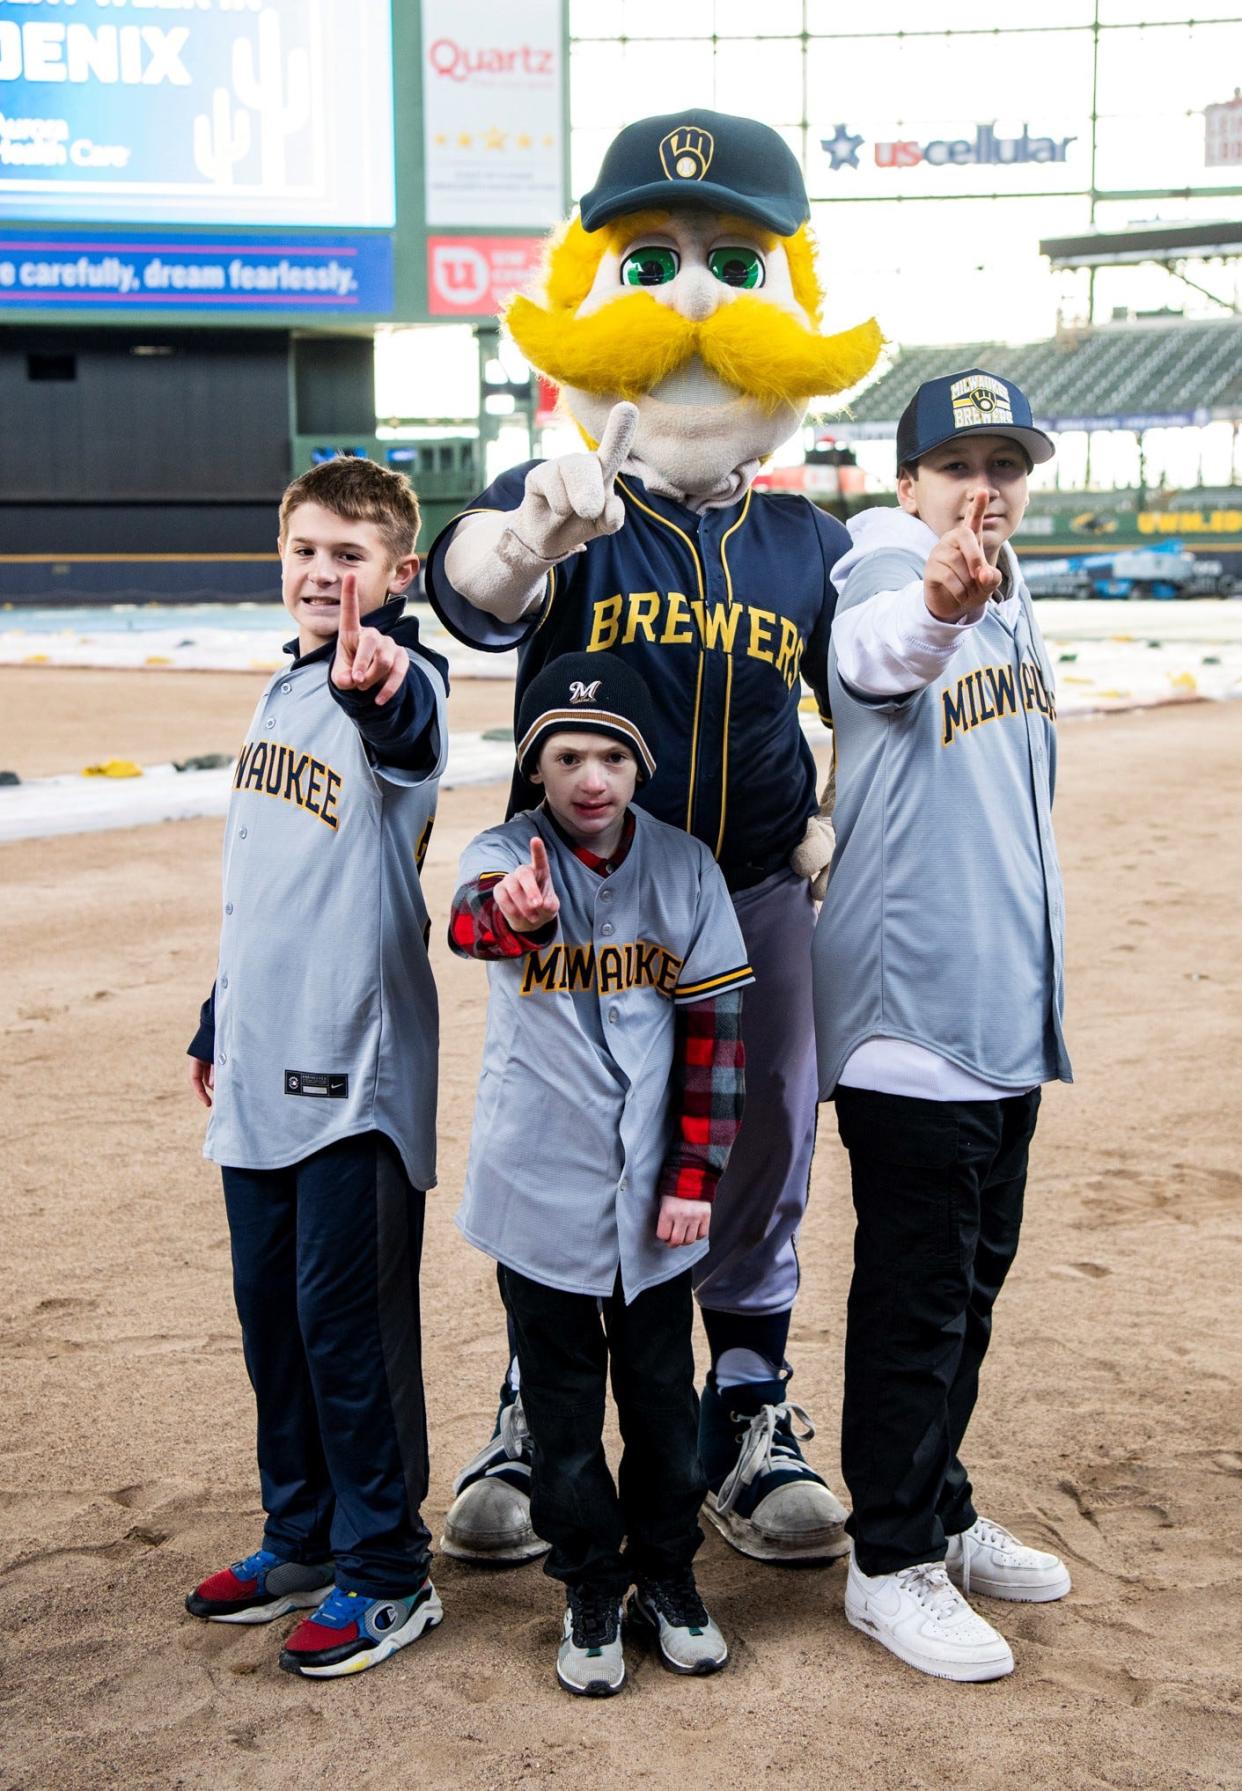 Bernie Brewer, the Milwaukee Brewers' mascot, joins (from left) 13-year-old Nolen Rosenthal of Lannon, 9-year-old Owen Strege of Algoma and 13-year-old Dazian Garcia of Greenfield after the youths and their families learned Feb. 18 at American Family Field in Milwaukee that they were invited by the Brewers and Aurora Health Care to visit the team's Spring Training camp in Phoenix and throw out the first pitch of the opening spring game Feb. 25.